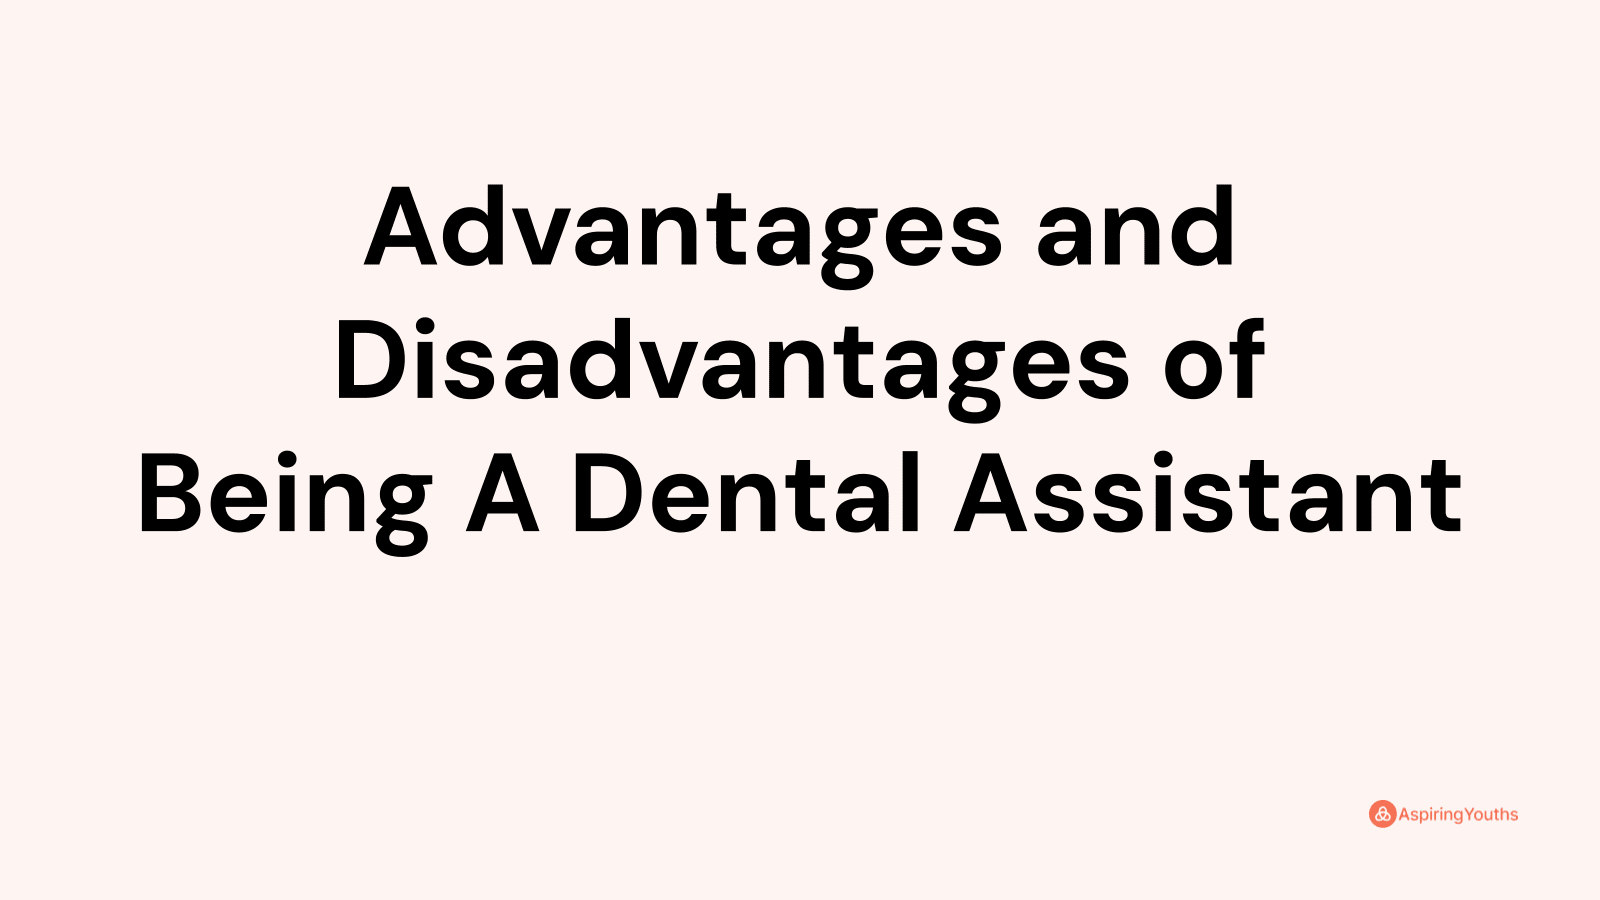 Advantages and disadvantages of Being A Dental Assistant